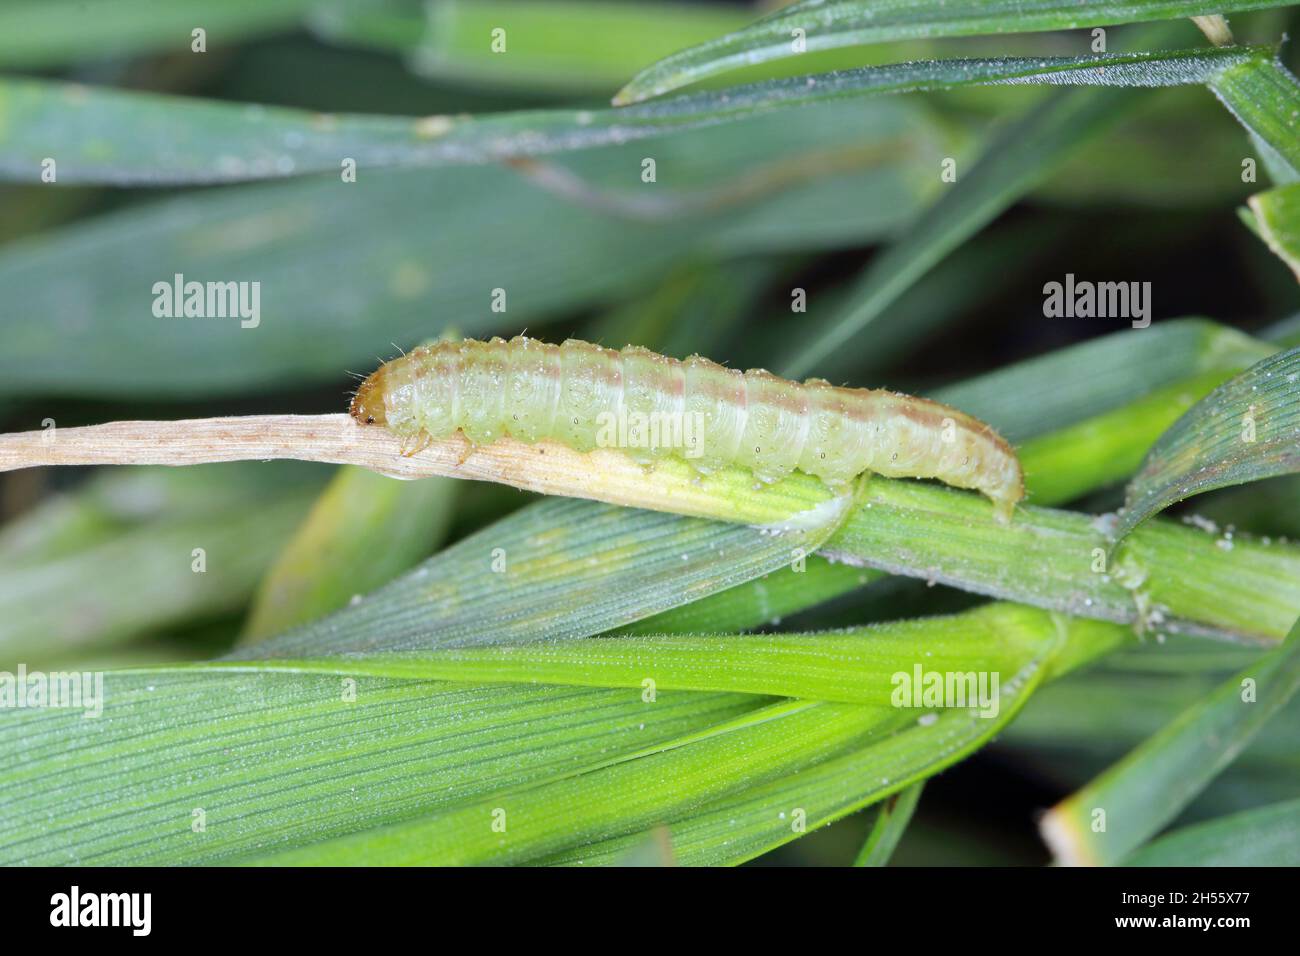 Caterpillar of the moth from the family Noctuidae: owlet moths, armyworm, feeding on young plants of winter cereals in the autumn period. Stock Photo